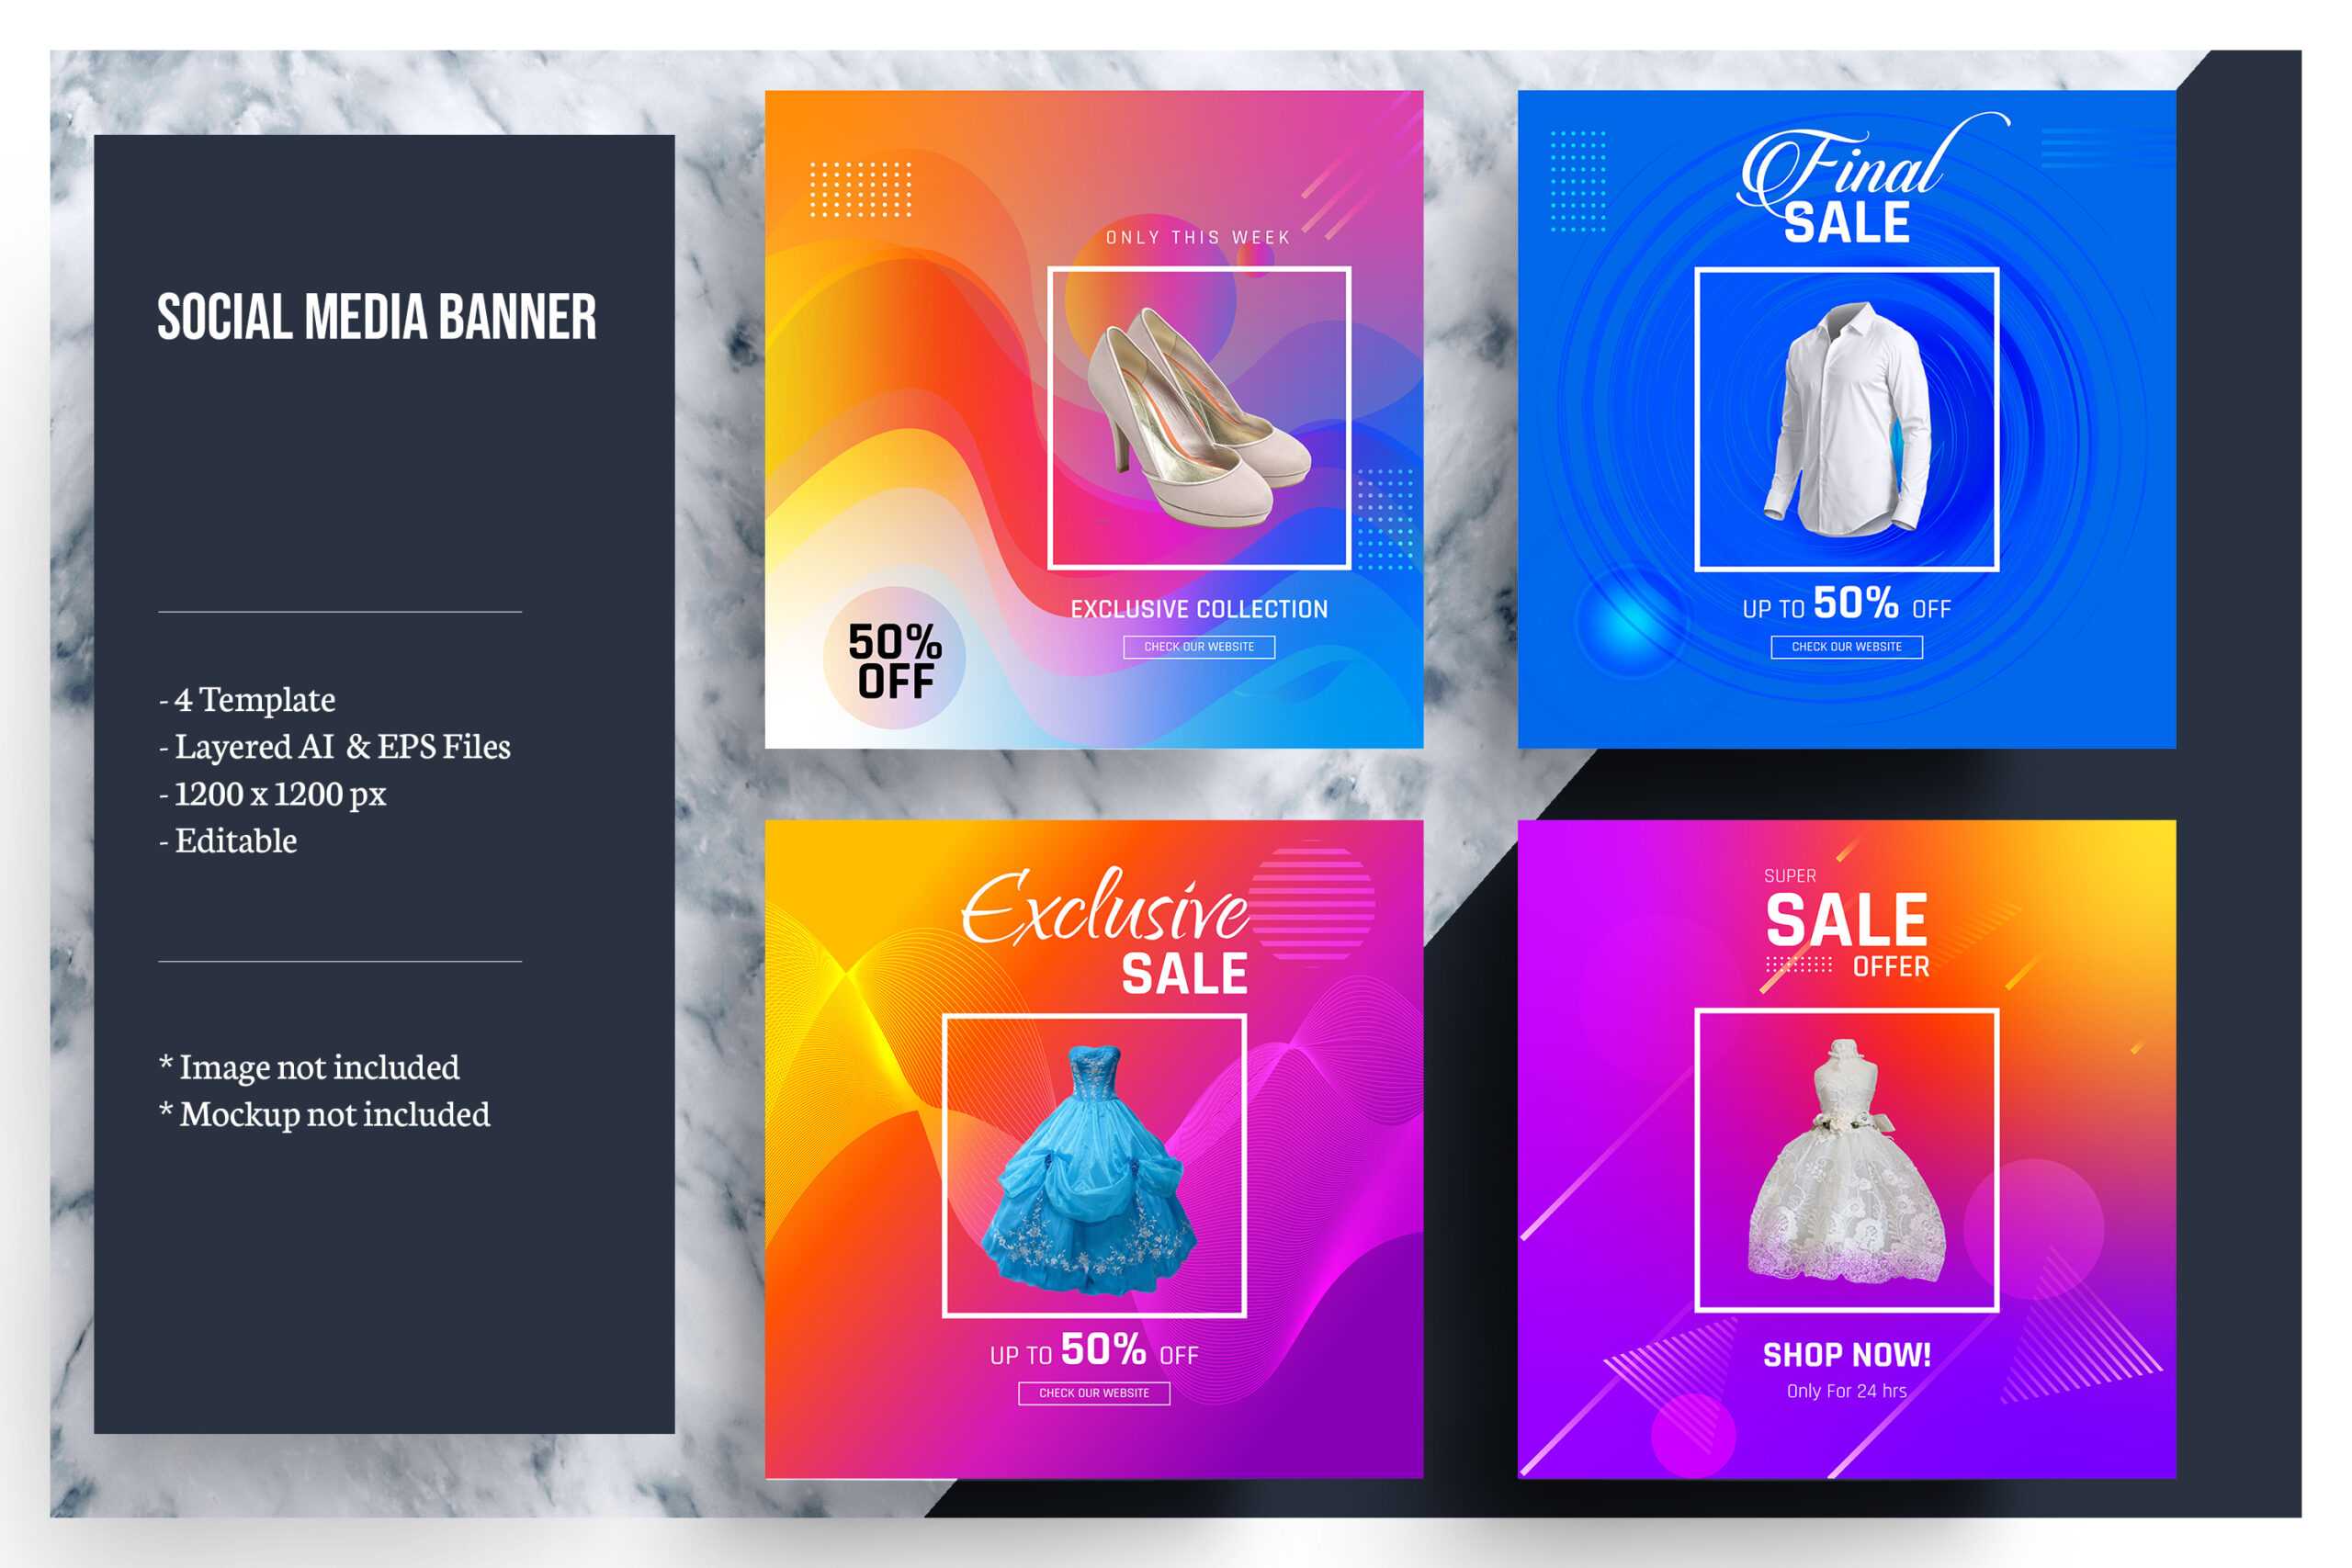 Colorful Social Media Banner Template Intended For Product Banner Template